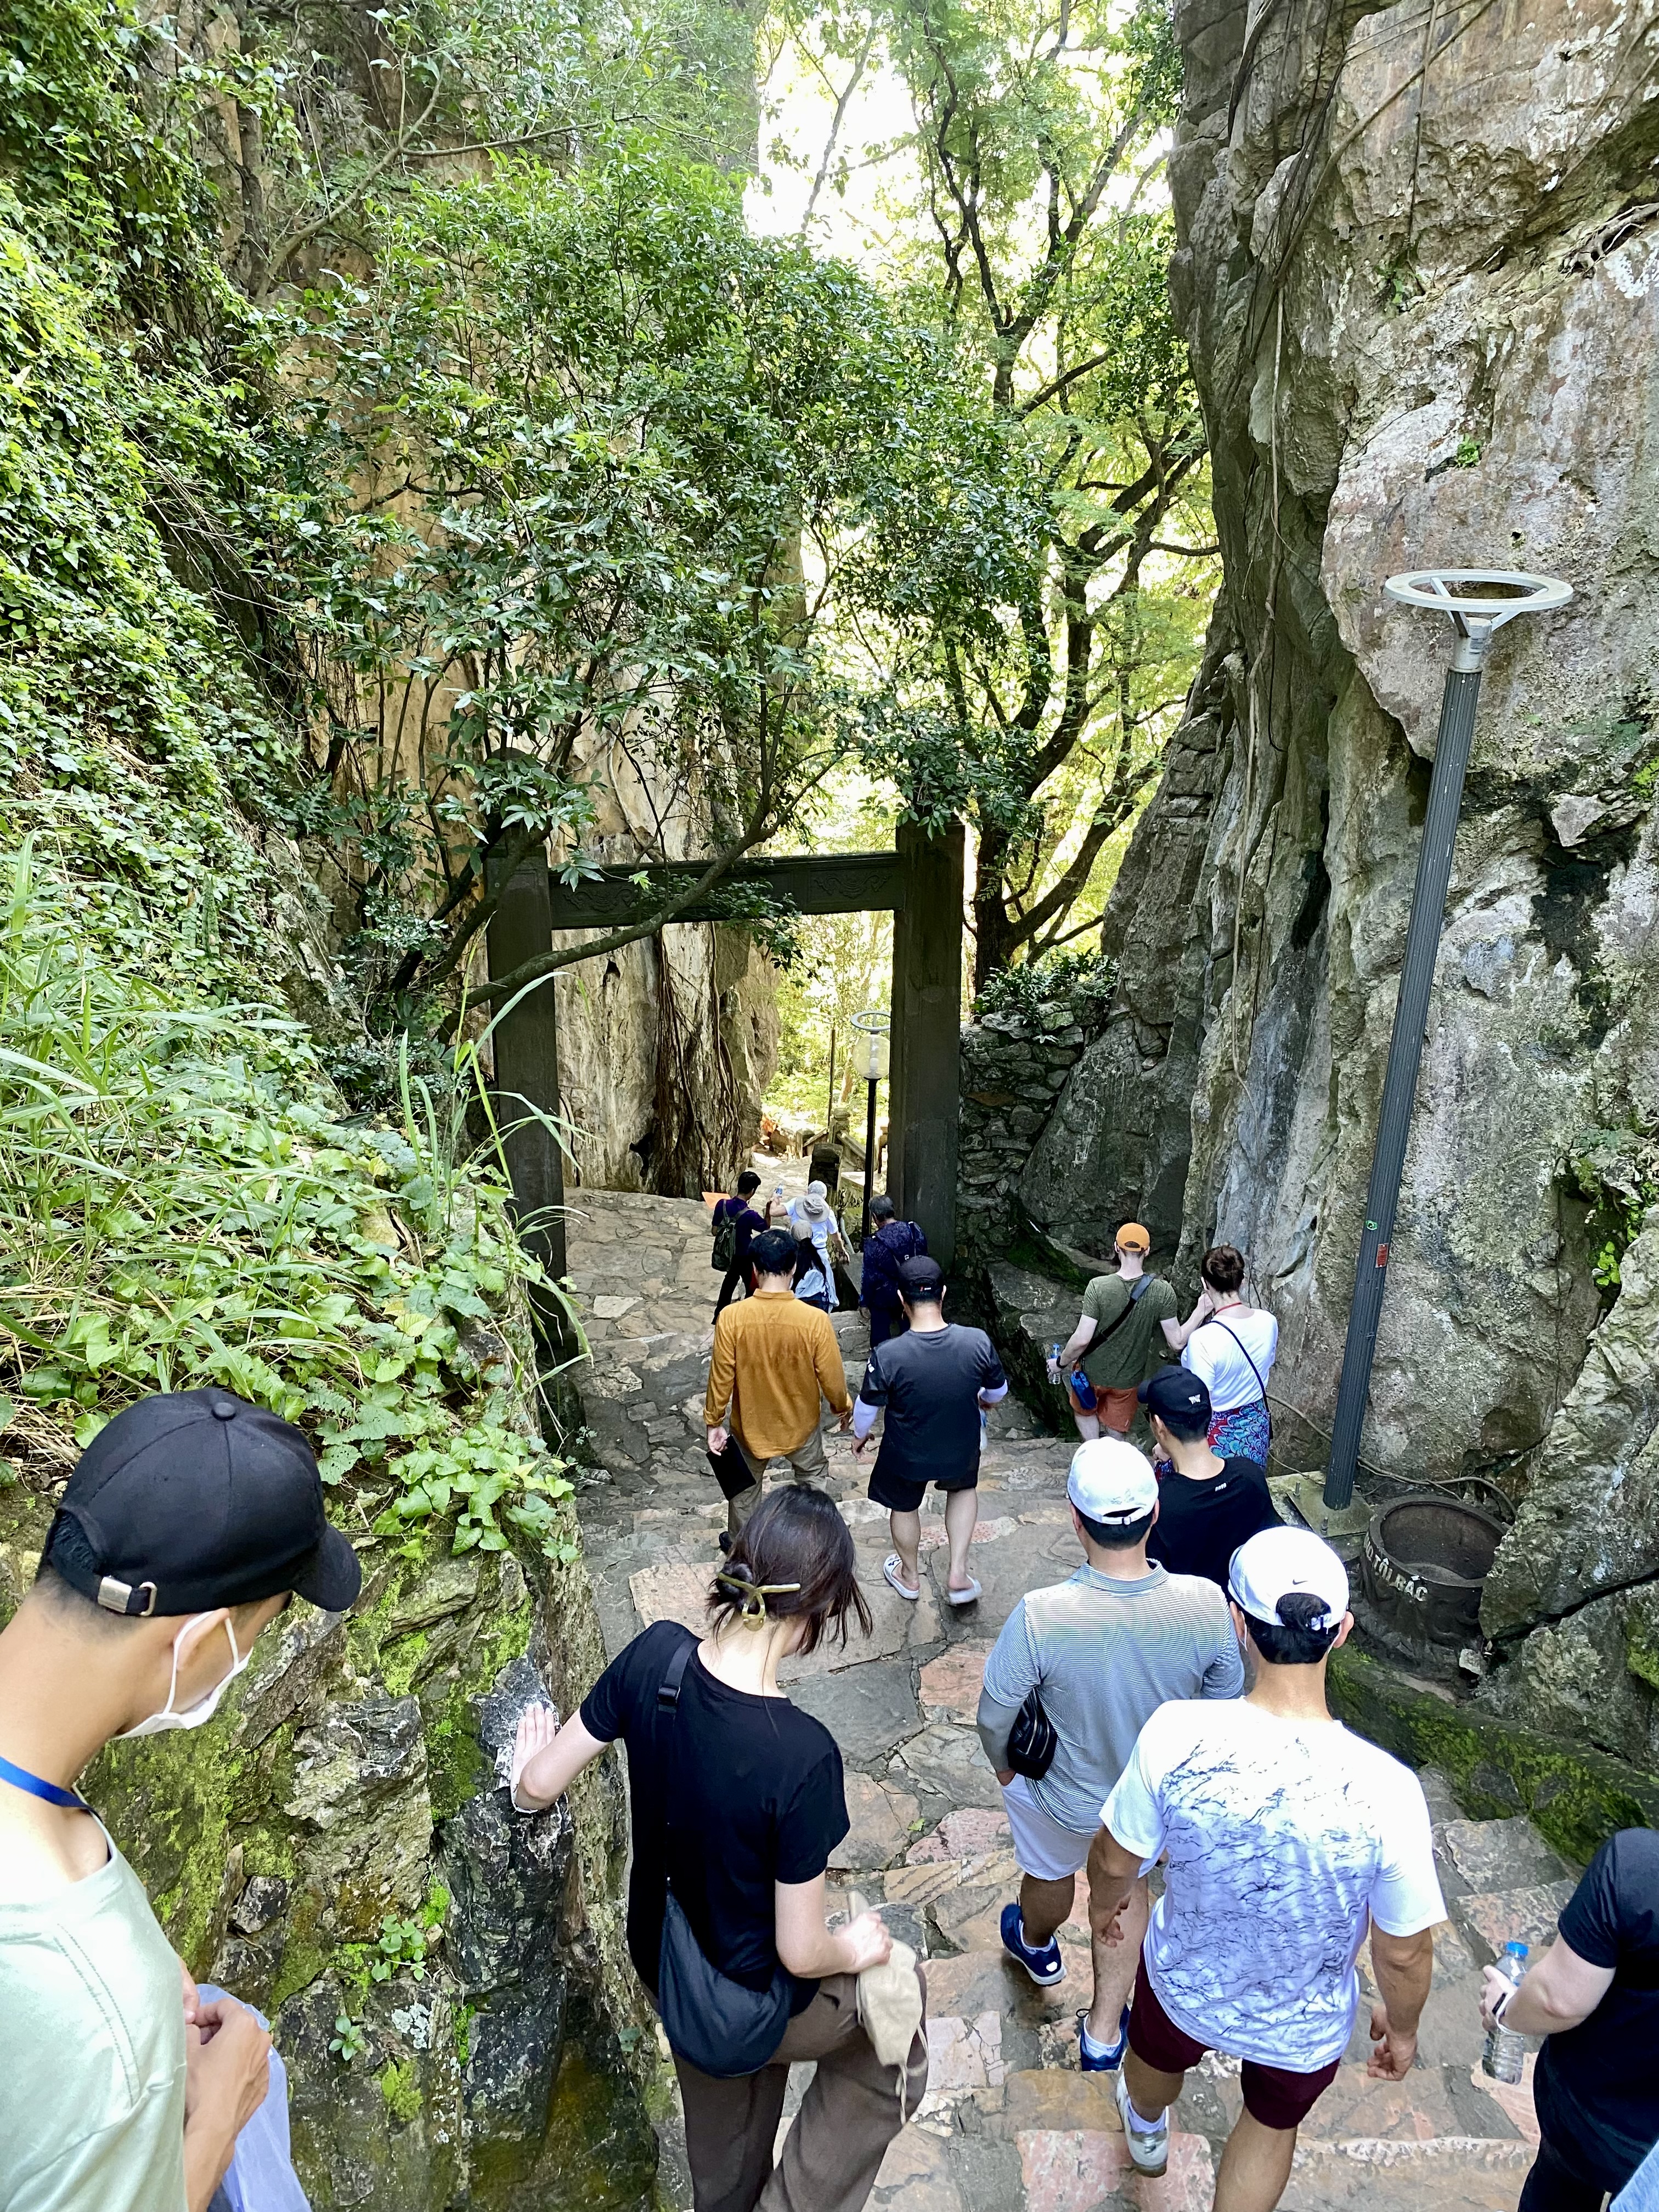 a group of people walking down a path in a rocky area